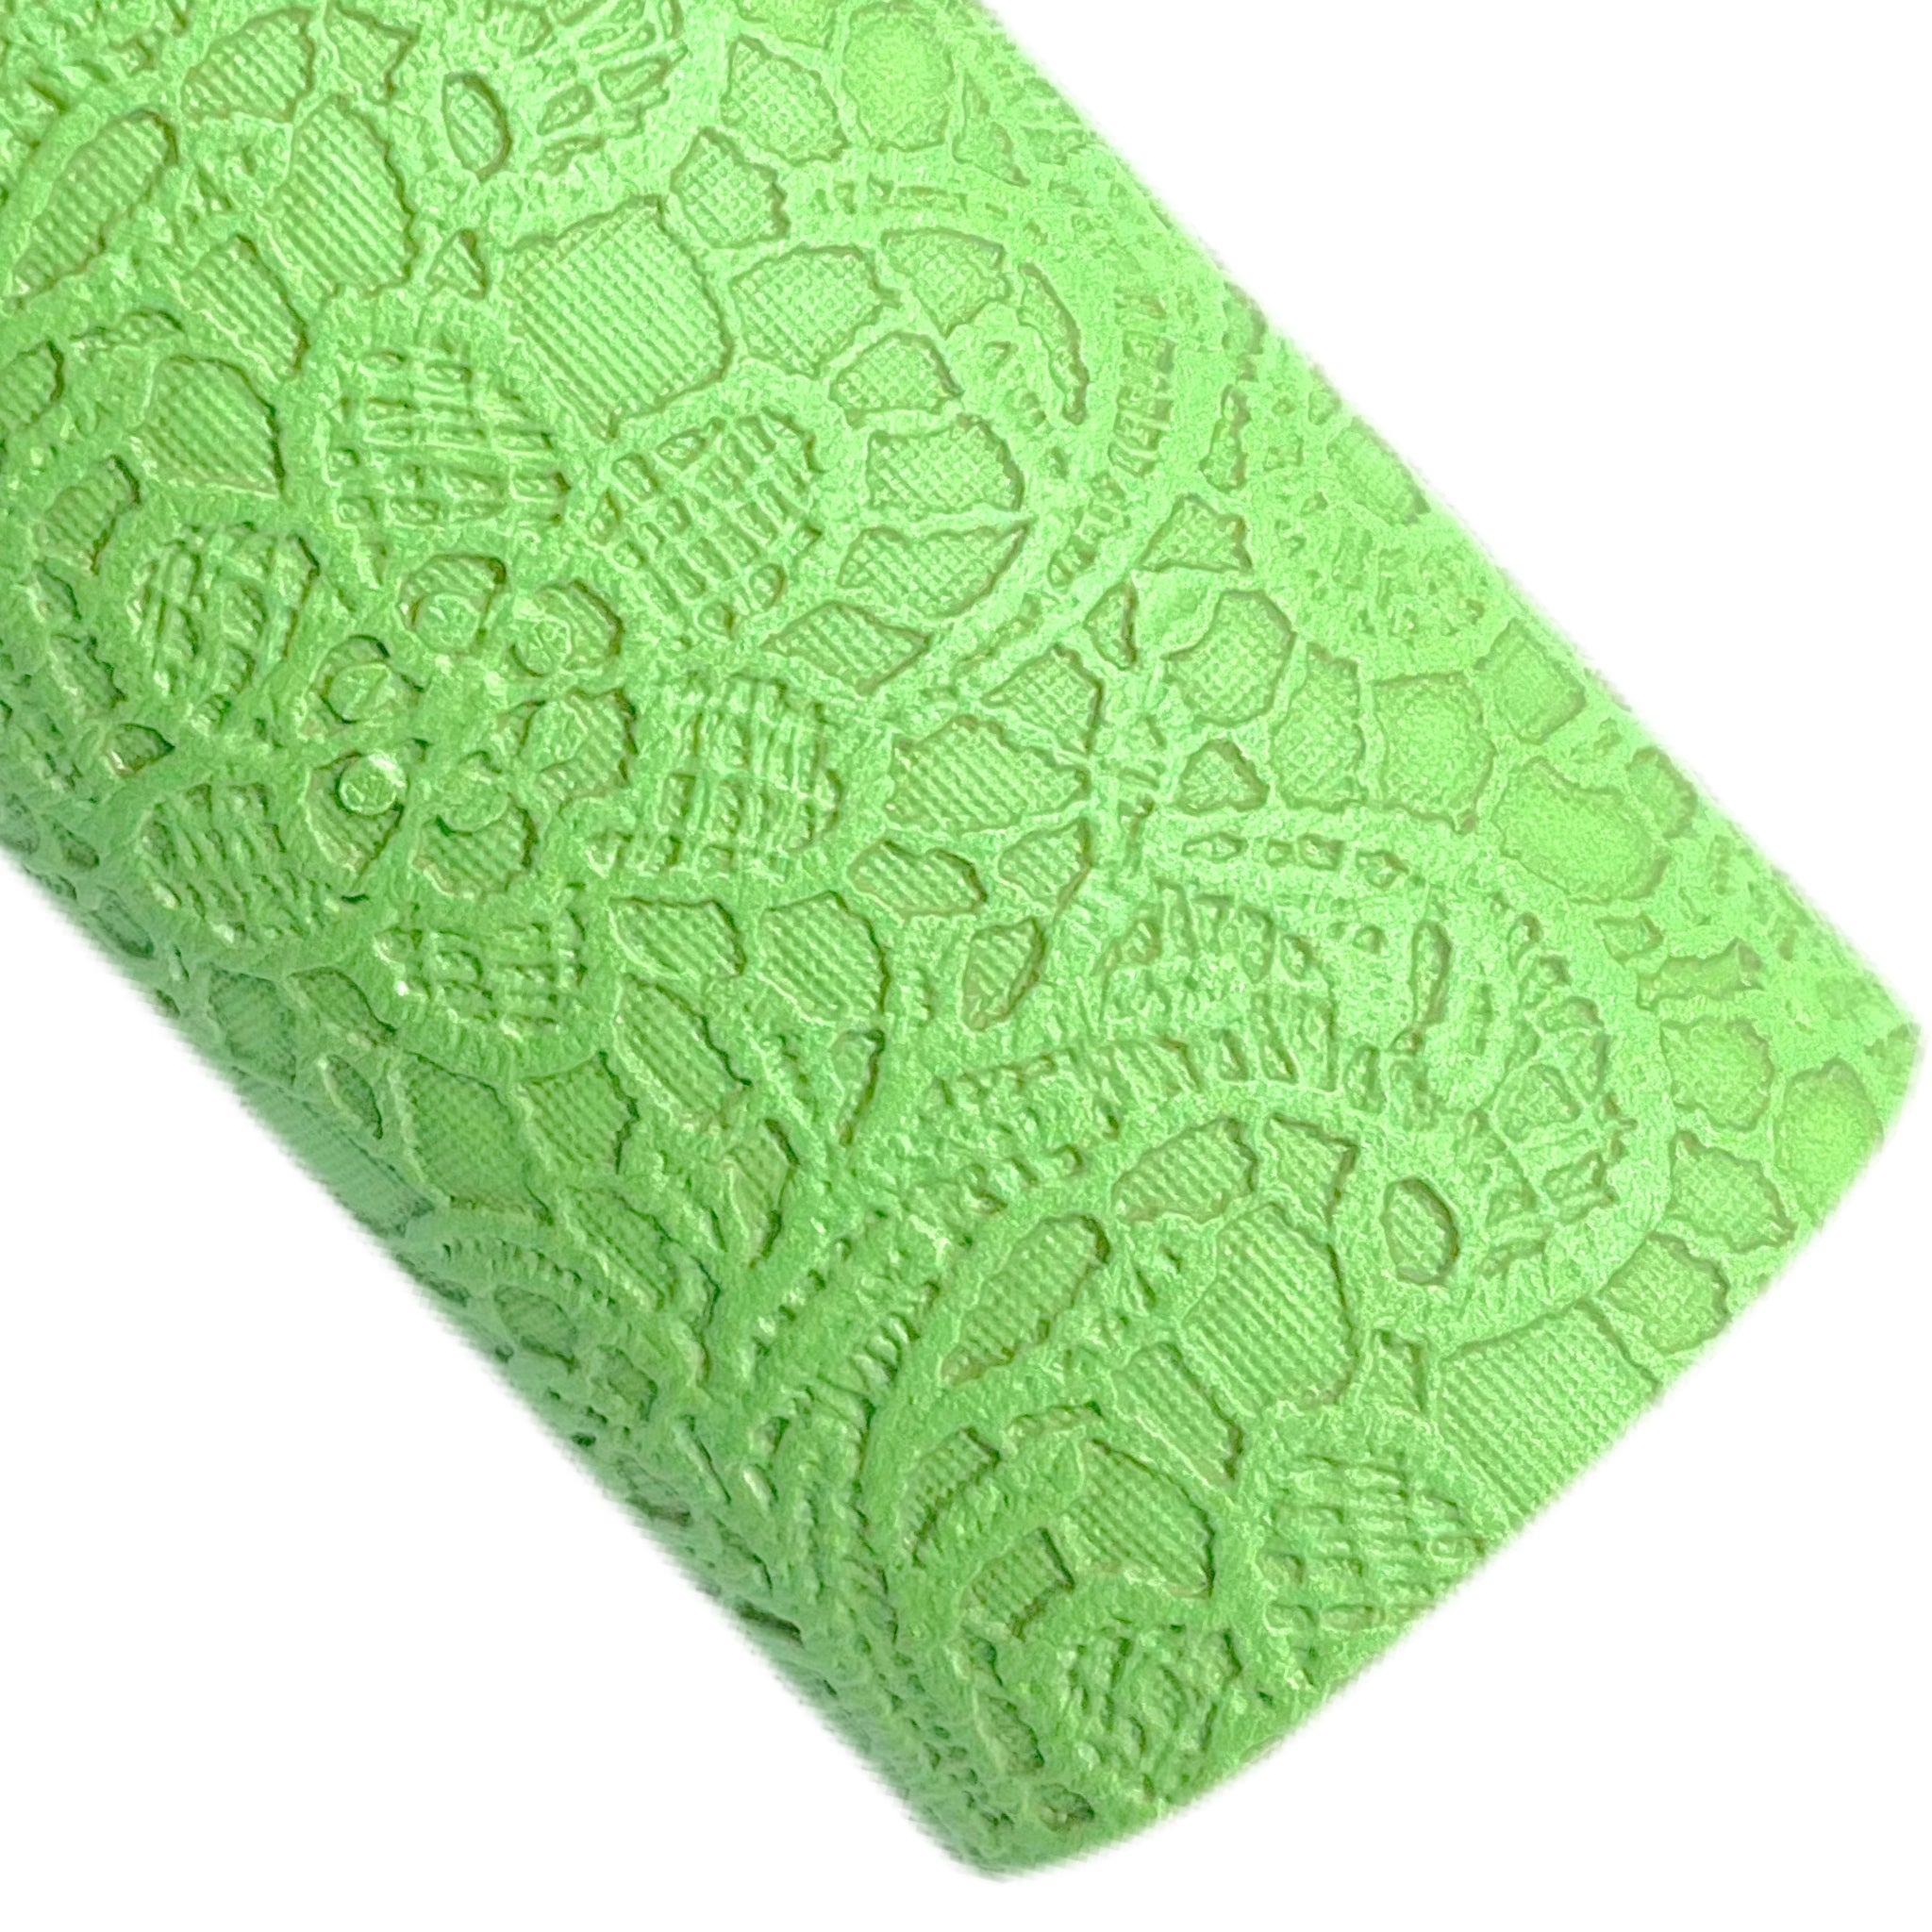 Green Embossed Appliqué Lace Faux Leather